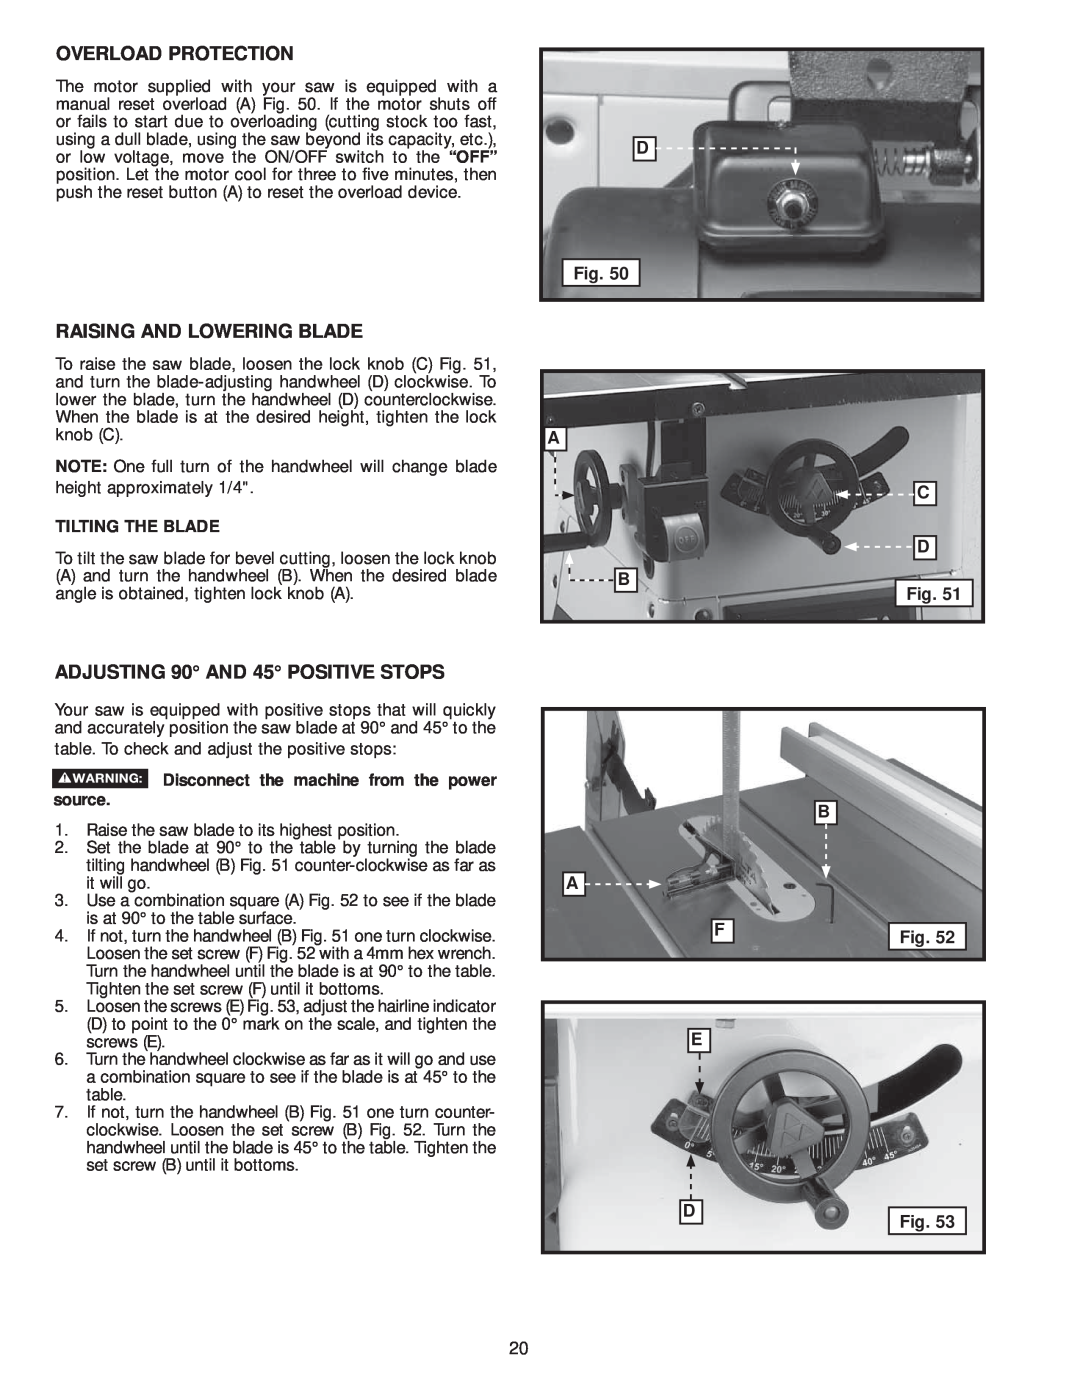 Delta 36-979, 36-978 instruction manual Overload Protection, Raising And Lowering Blade, ADJUSTING 90 AND 45 POSITIVE STOPS 